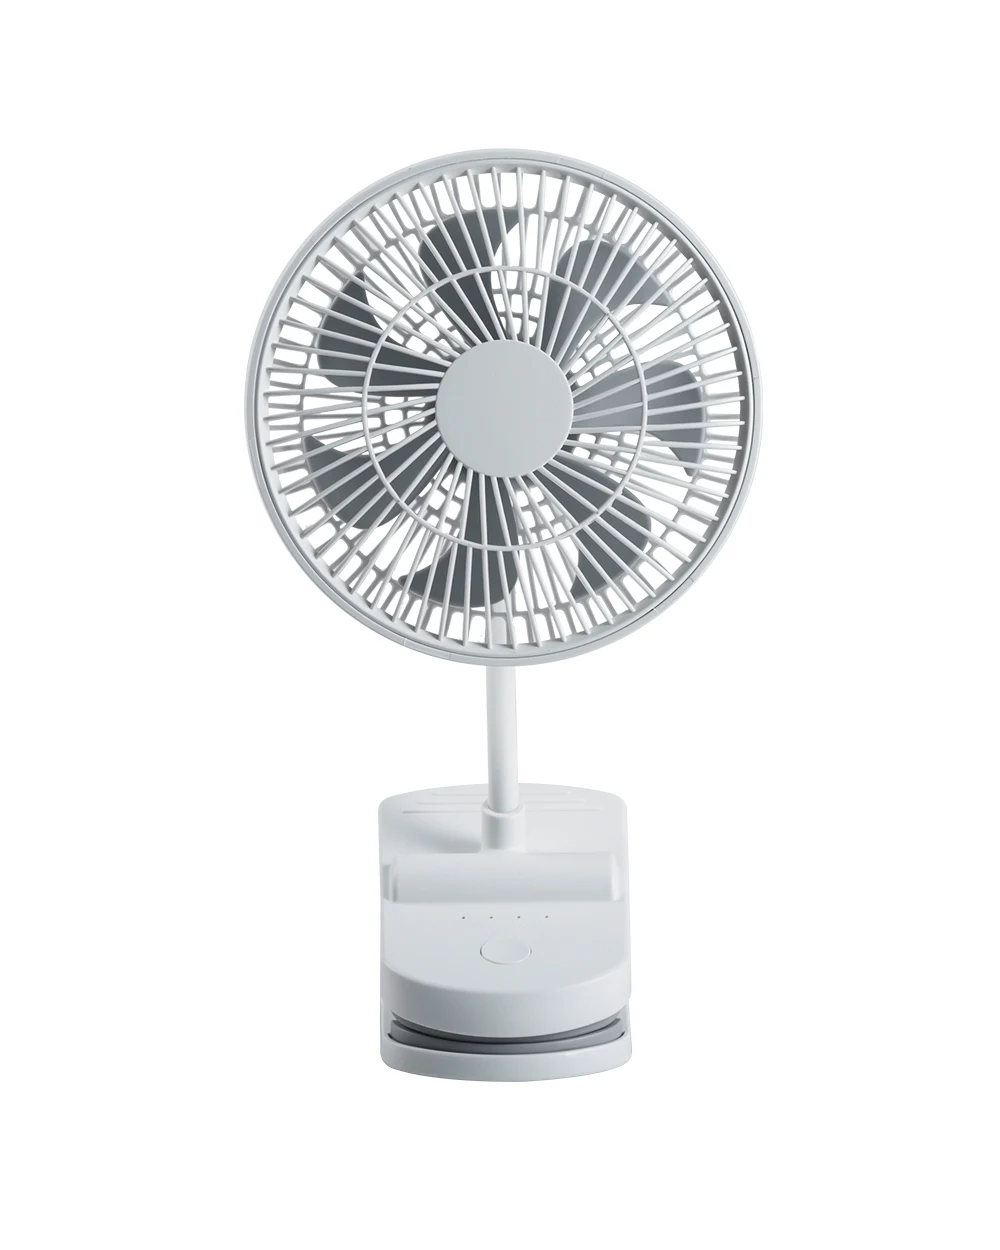 KASYDoFF Clip Fan Portable USB Stroller Fans with 4 Speeds Quiet Clip on Mini Table Fan 360° Rotatable Battery Operated White 6